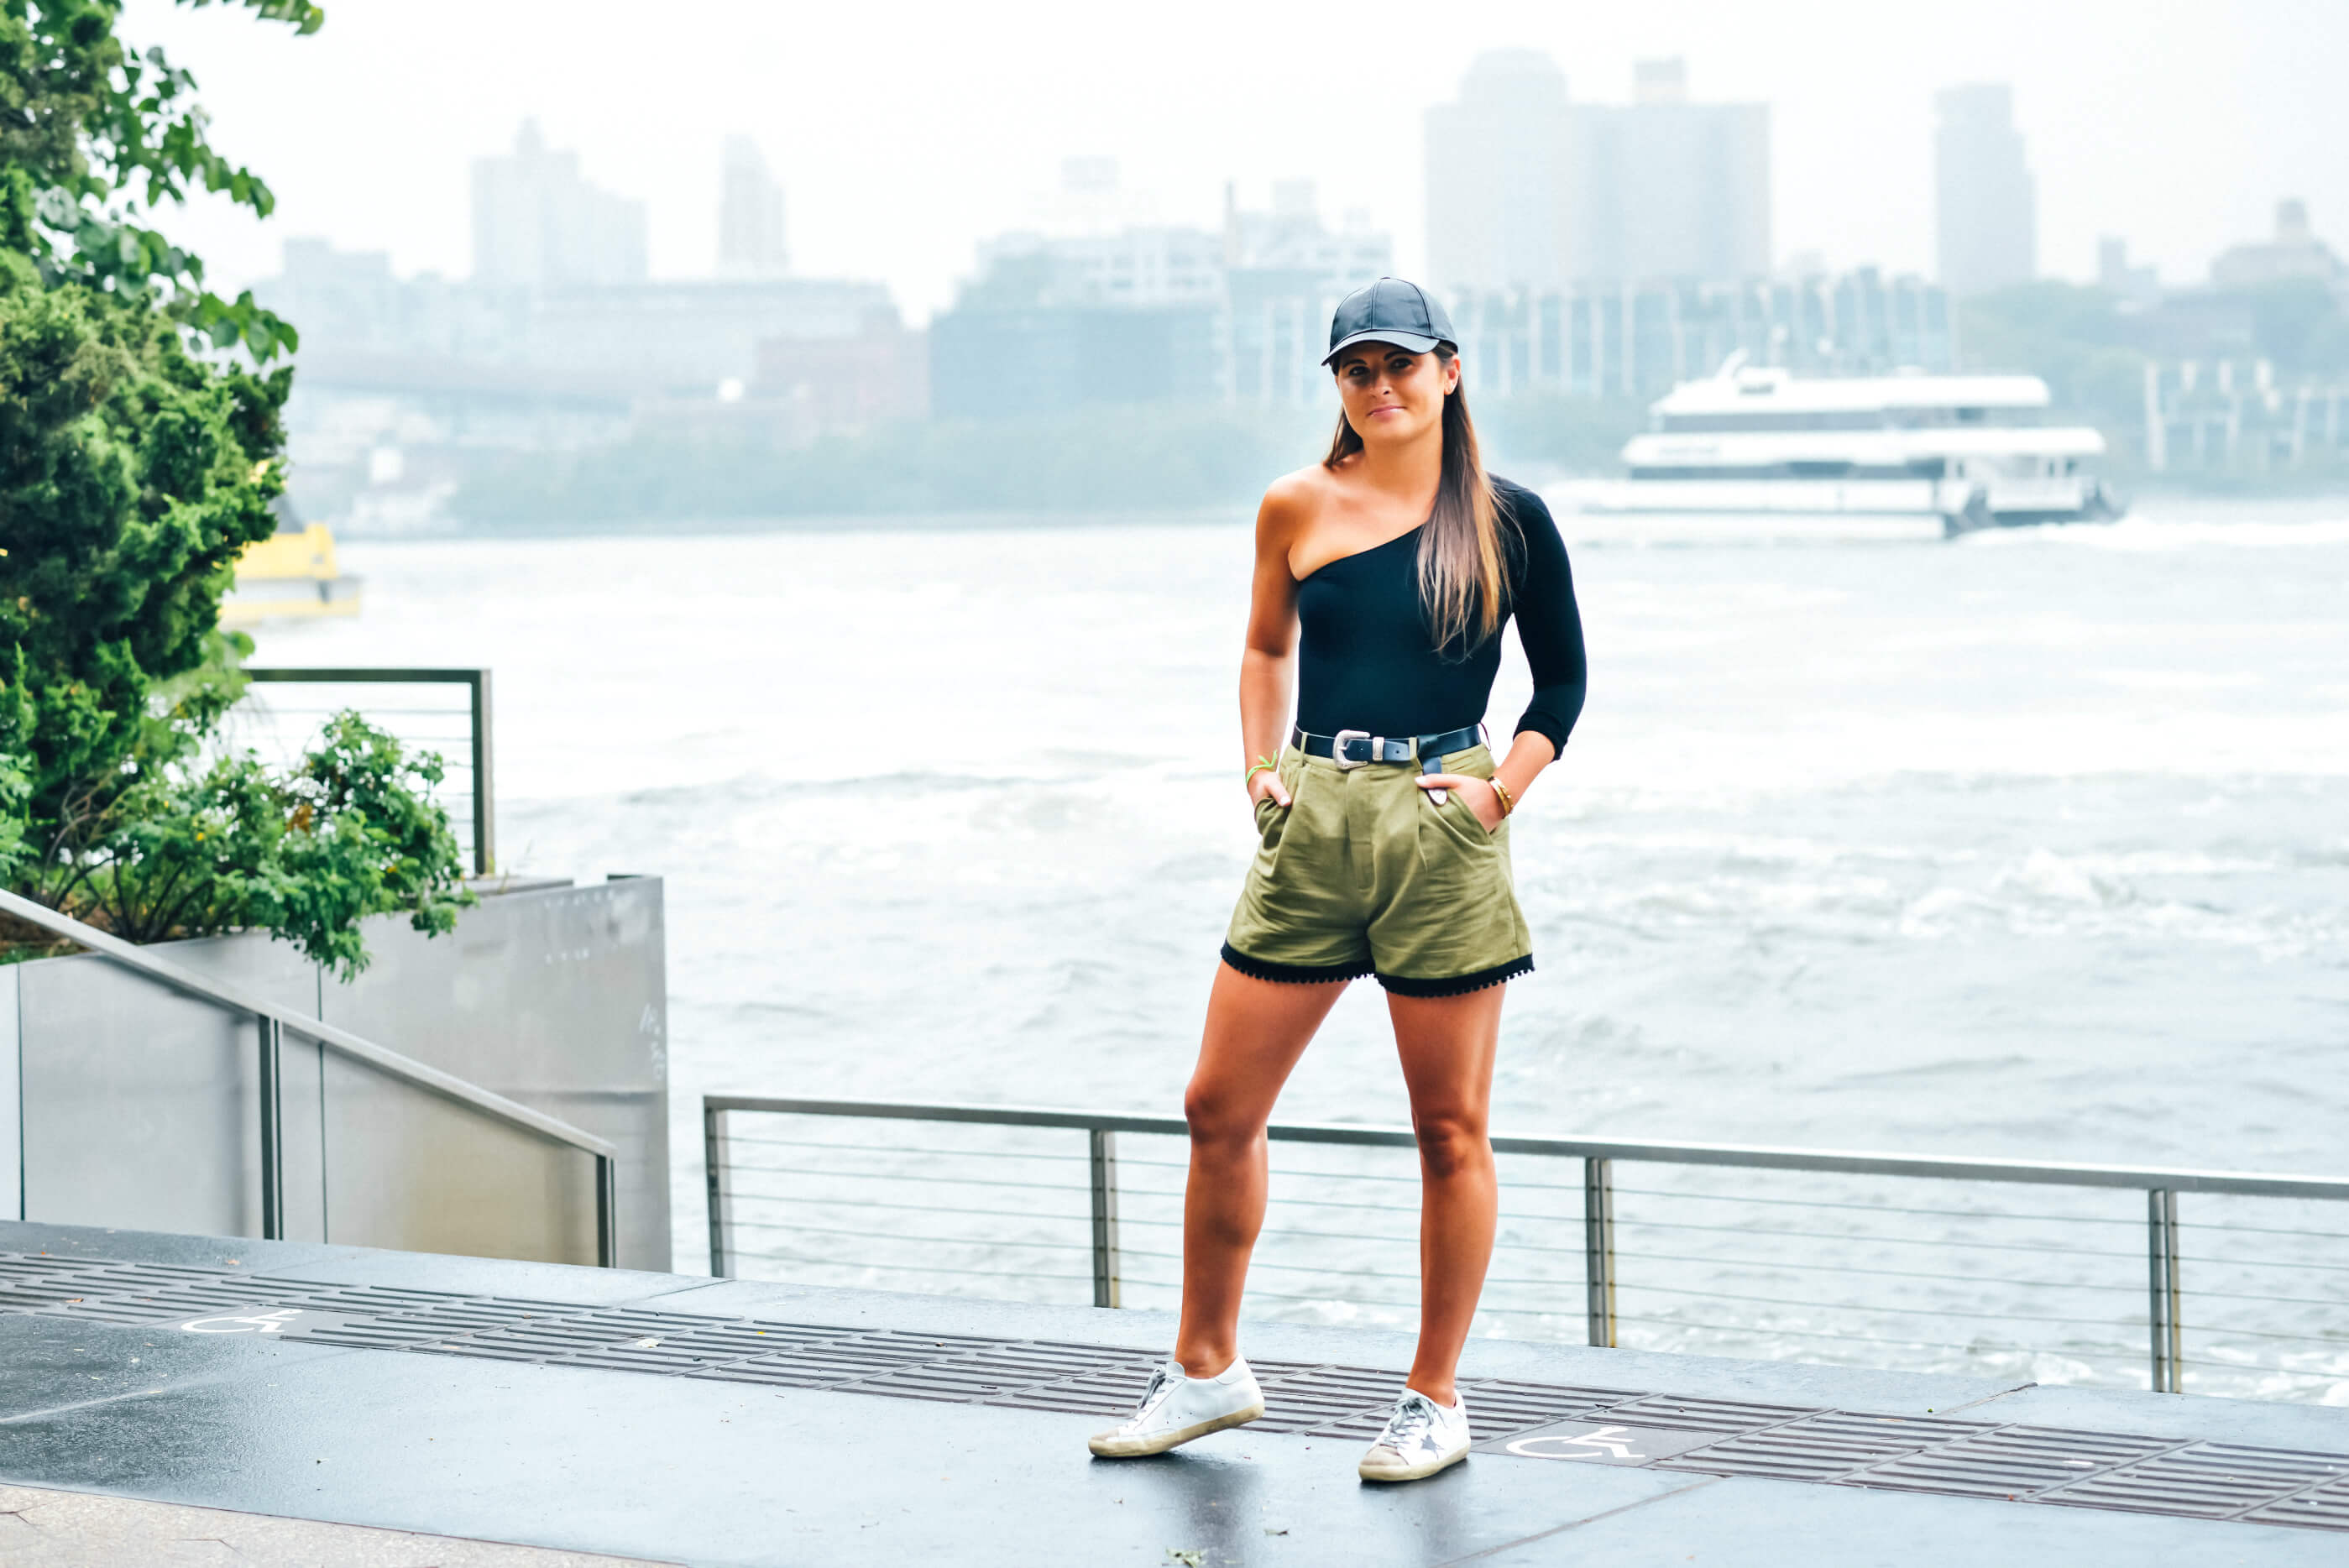 Commando One-Shoulder Bodysuit, Fall Outfit Ideas, Sporty Outfit, Leather Baseball Cap, Tilden of To Be Bright